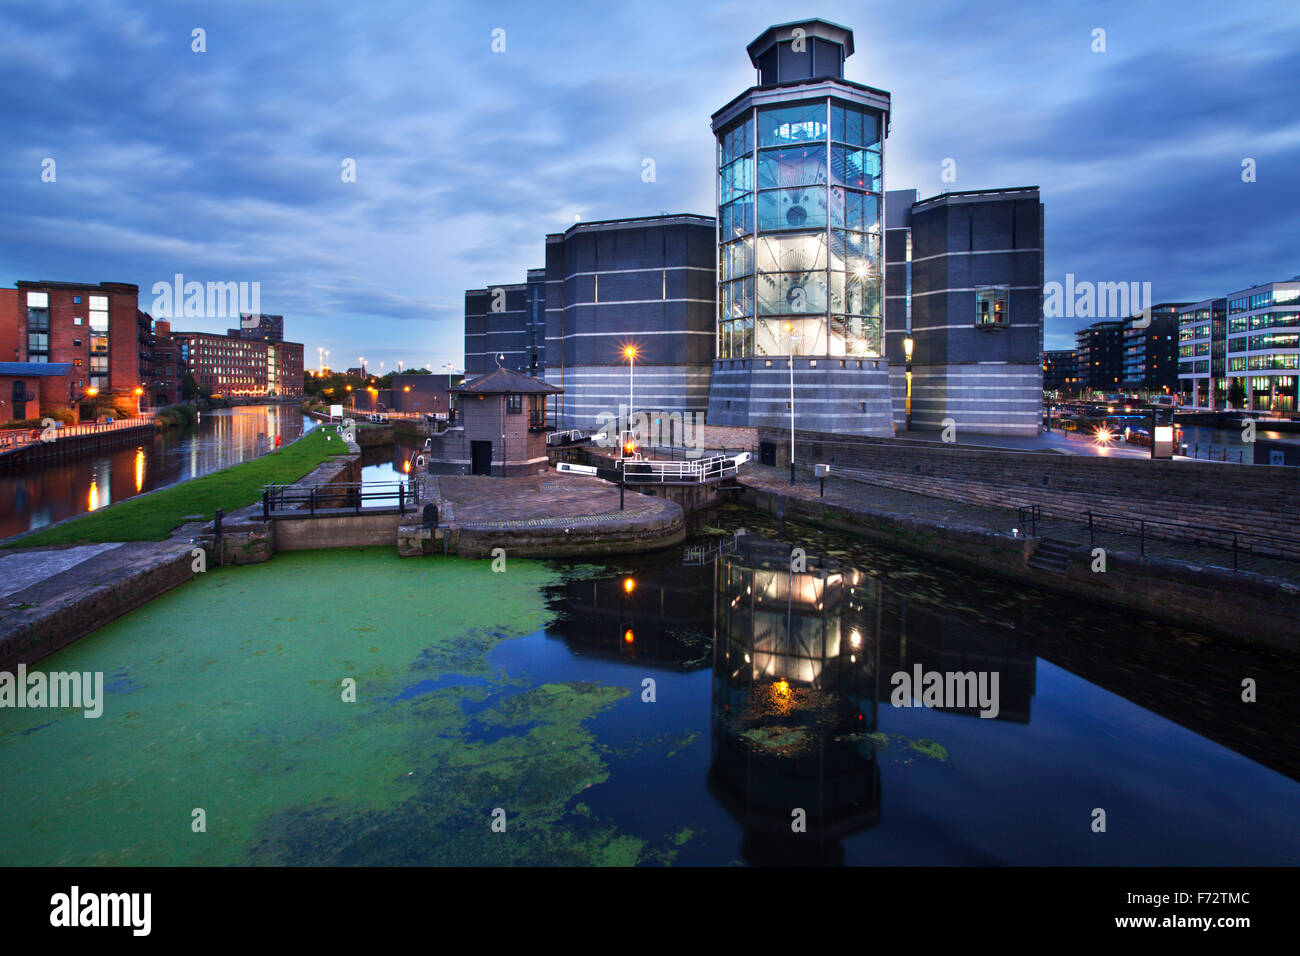 Royal Armouries Museum e Leeds Fiume Lock n. 1 al crepuscolo Leeds West Yorkshire Inghilterra Foto Stock